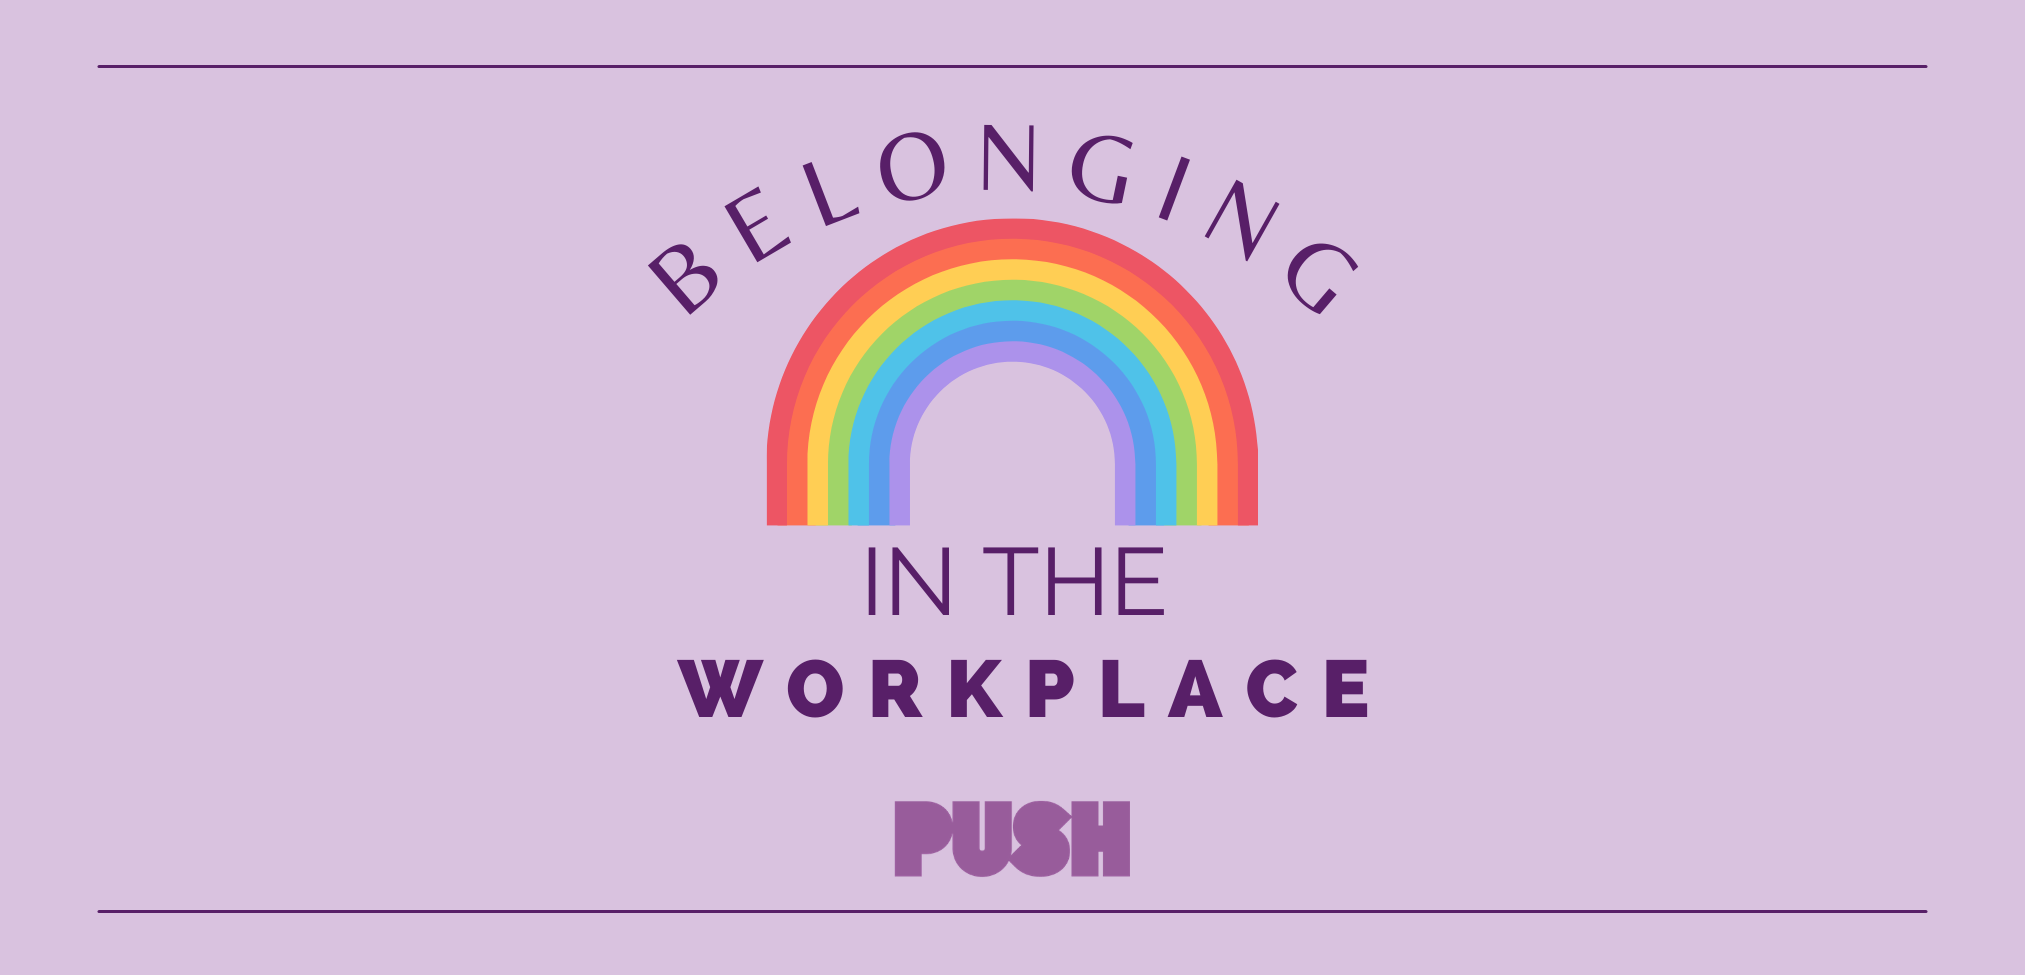 Belonging in the Workplace: Getting inclusivity and allyship right beyond pride